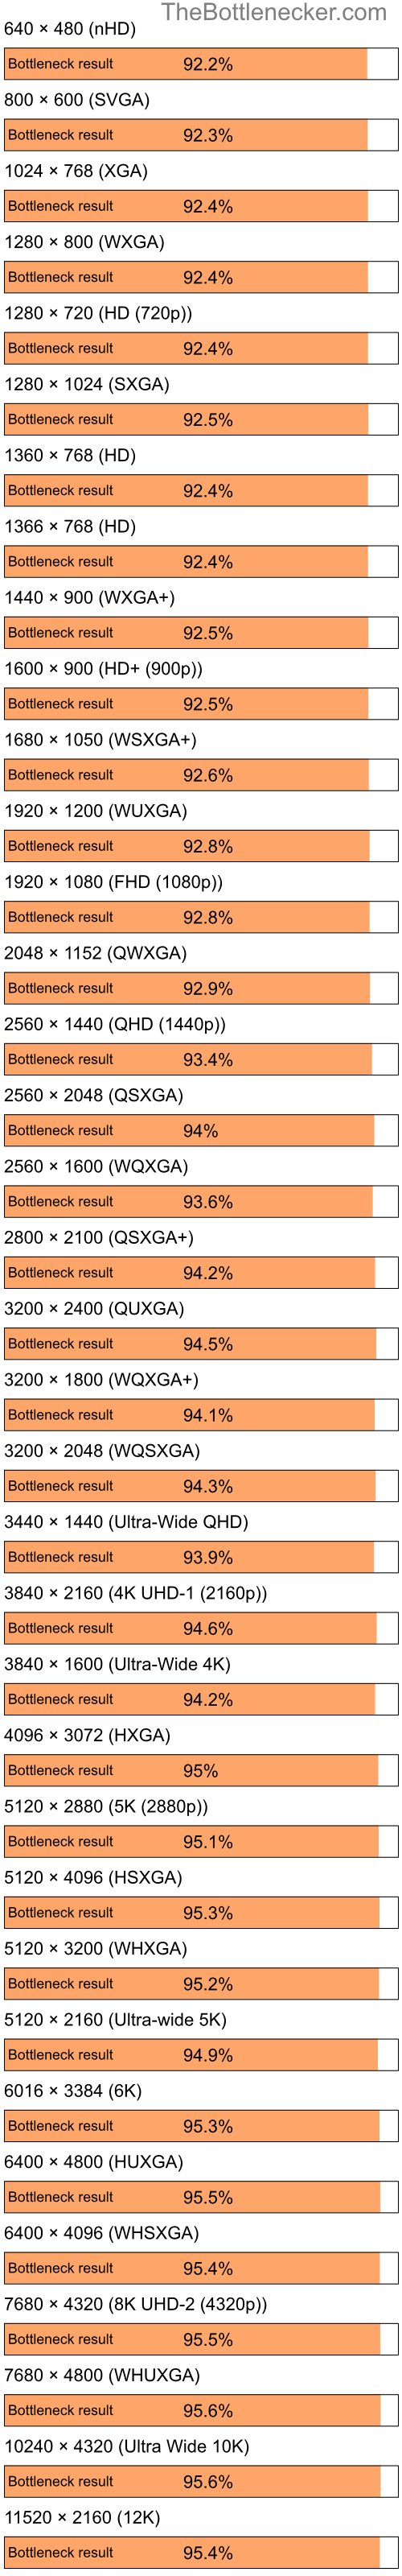 Bottleneck results by resolution for Intel Pentium 4 and AMD Radeon 9250 in Graphic Card Intense Tasks